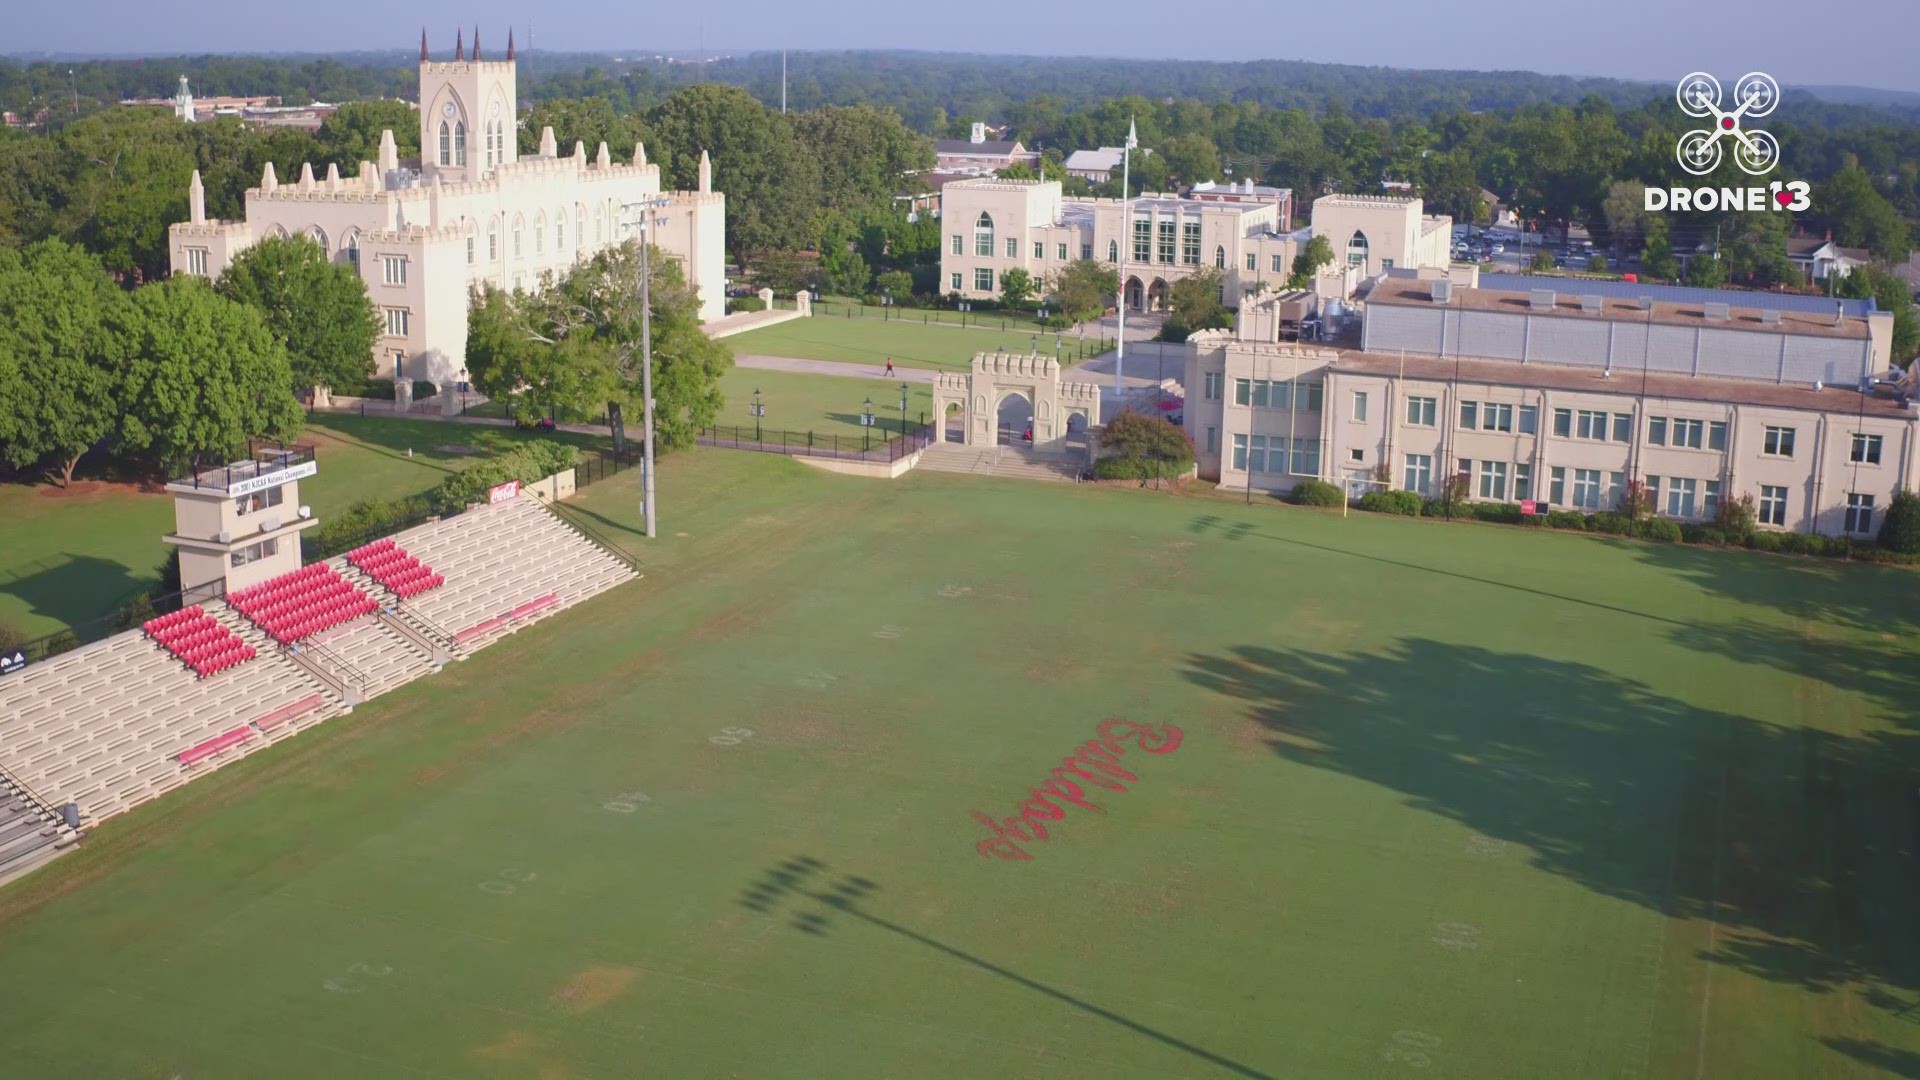 The historic campus once served as the Georgia Capitol. Now it's home to a military college and prep school.